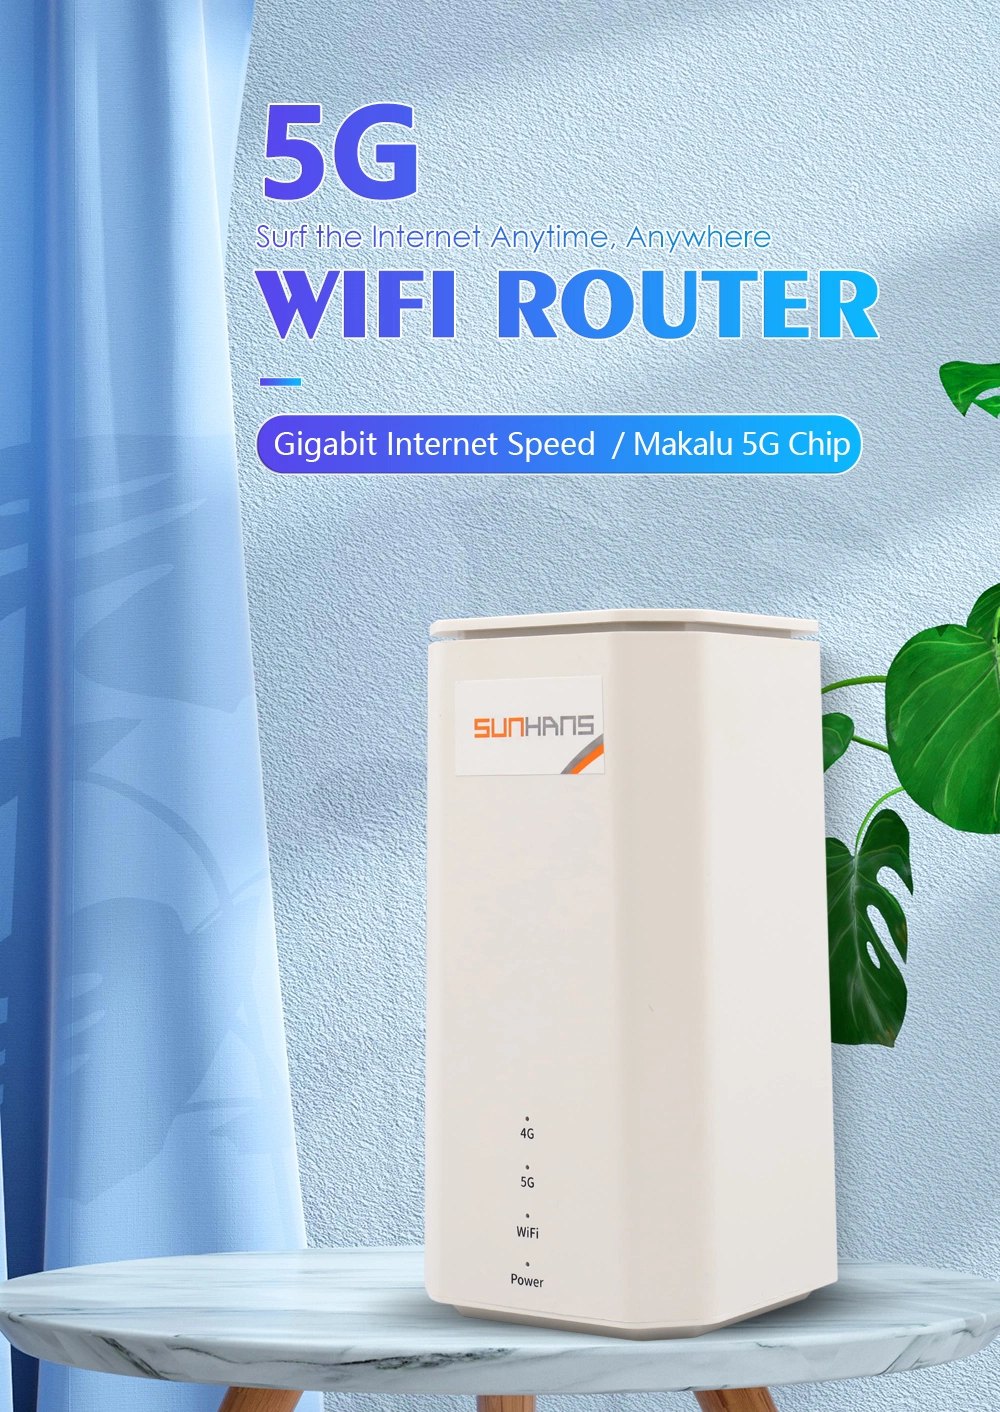 5g WiFi Network Integrated World-Wide 5g-2g Multi Modem SIM Wireless Router with 4X4 MIMO Antenna